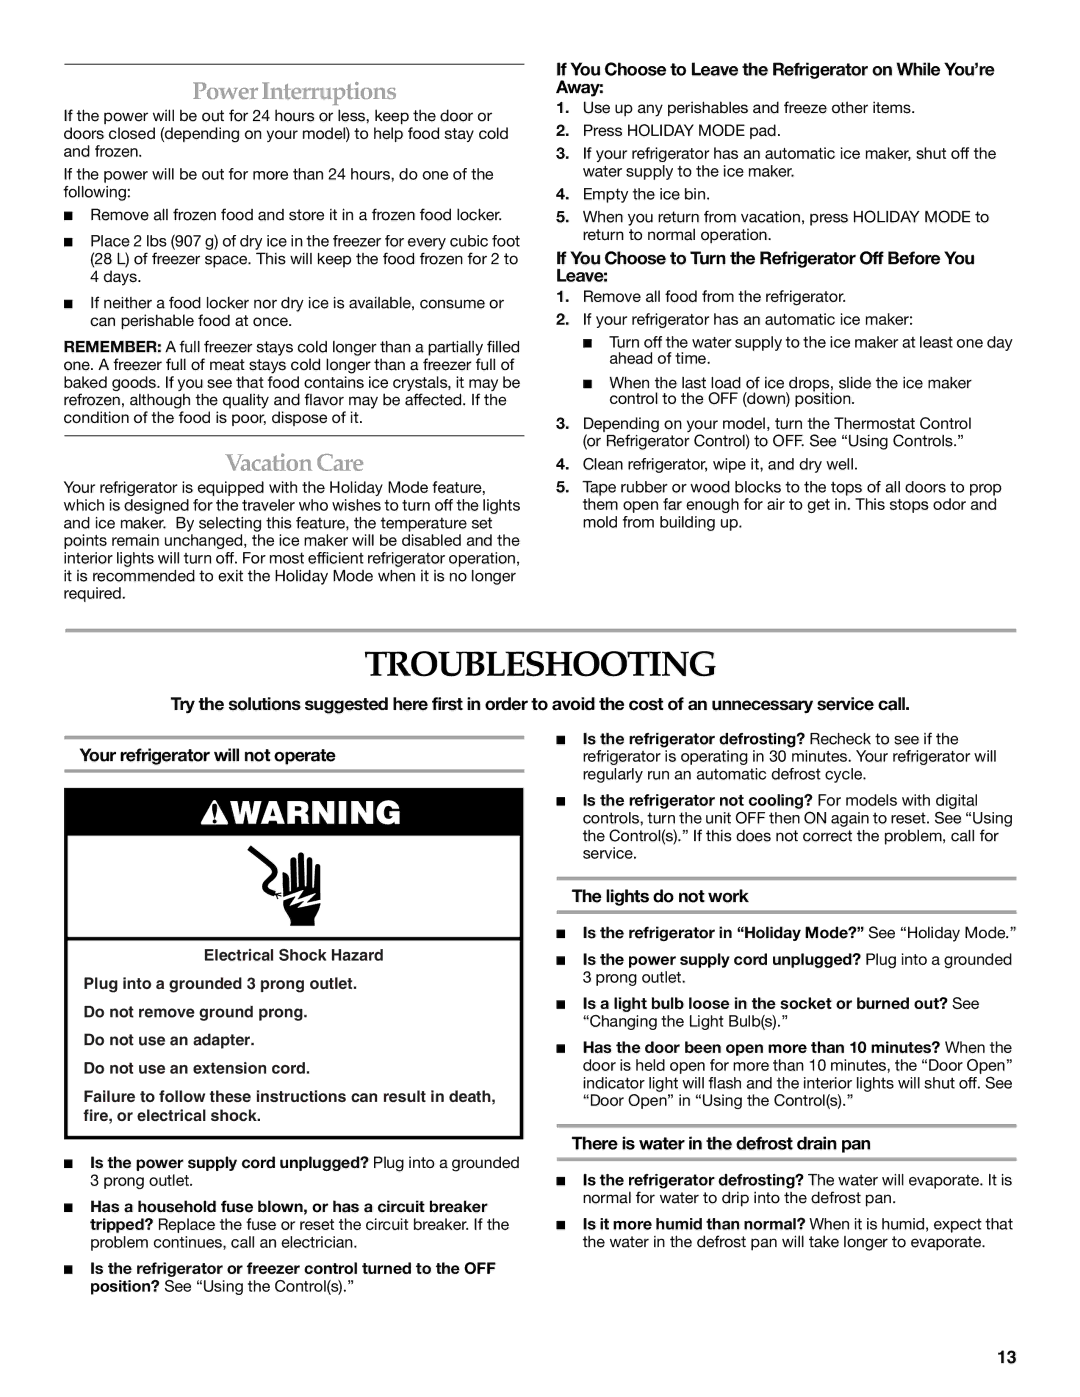 KitchenAid Bottom-Mount Built-In Refrigerator manual Troubleshooting, PowerInterruptions, Vacation Care 